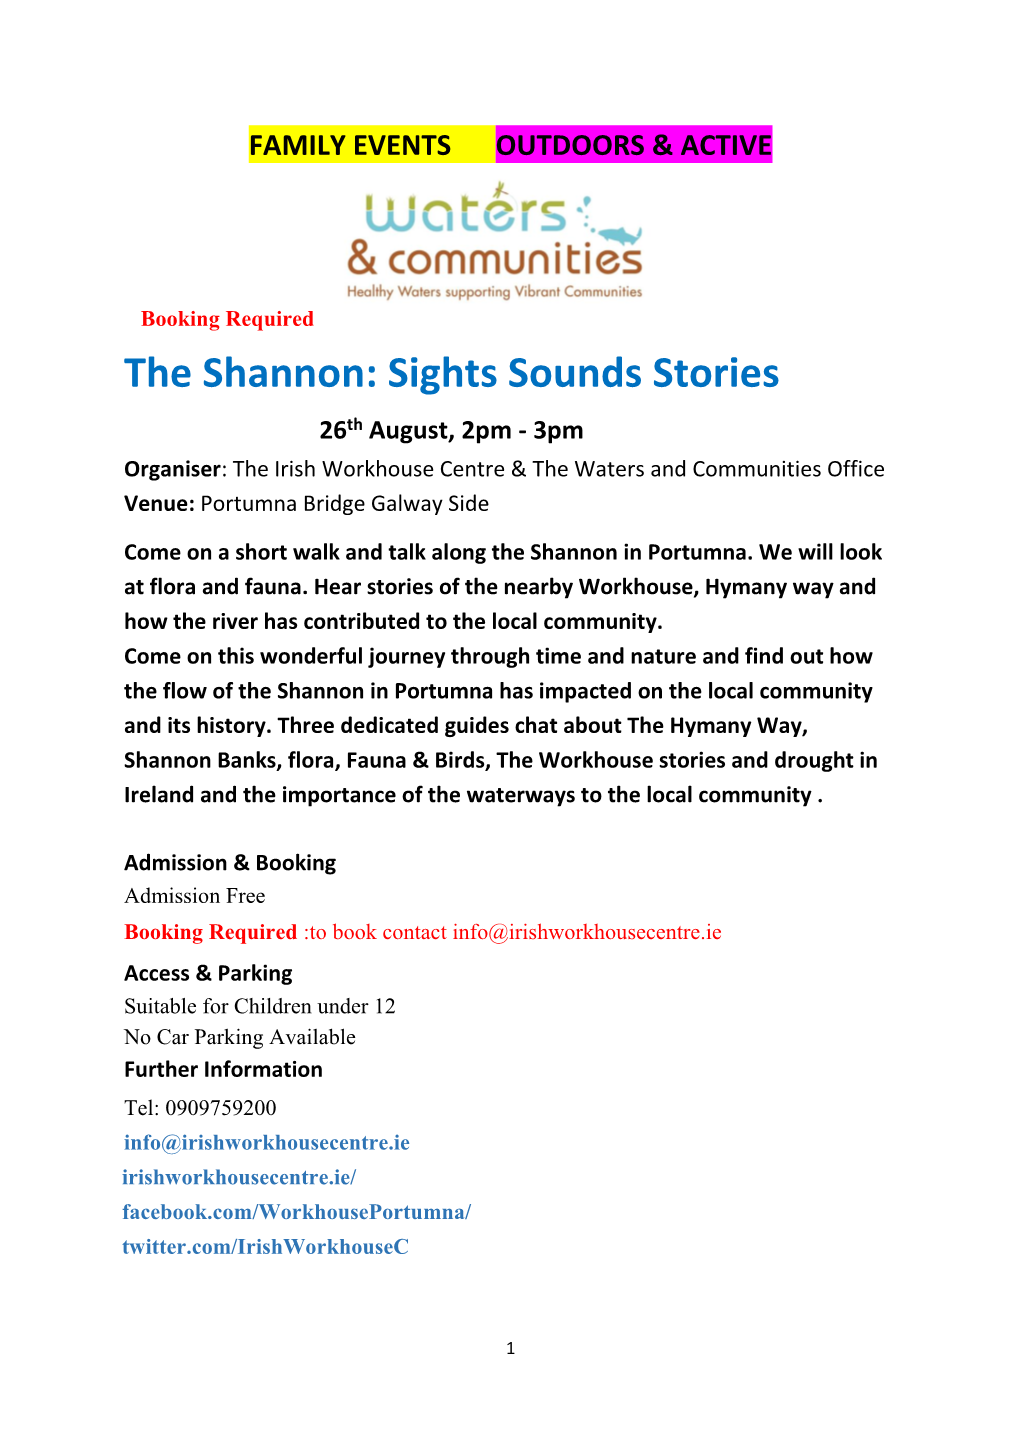 The Shannon: Sights Sounds Stories